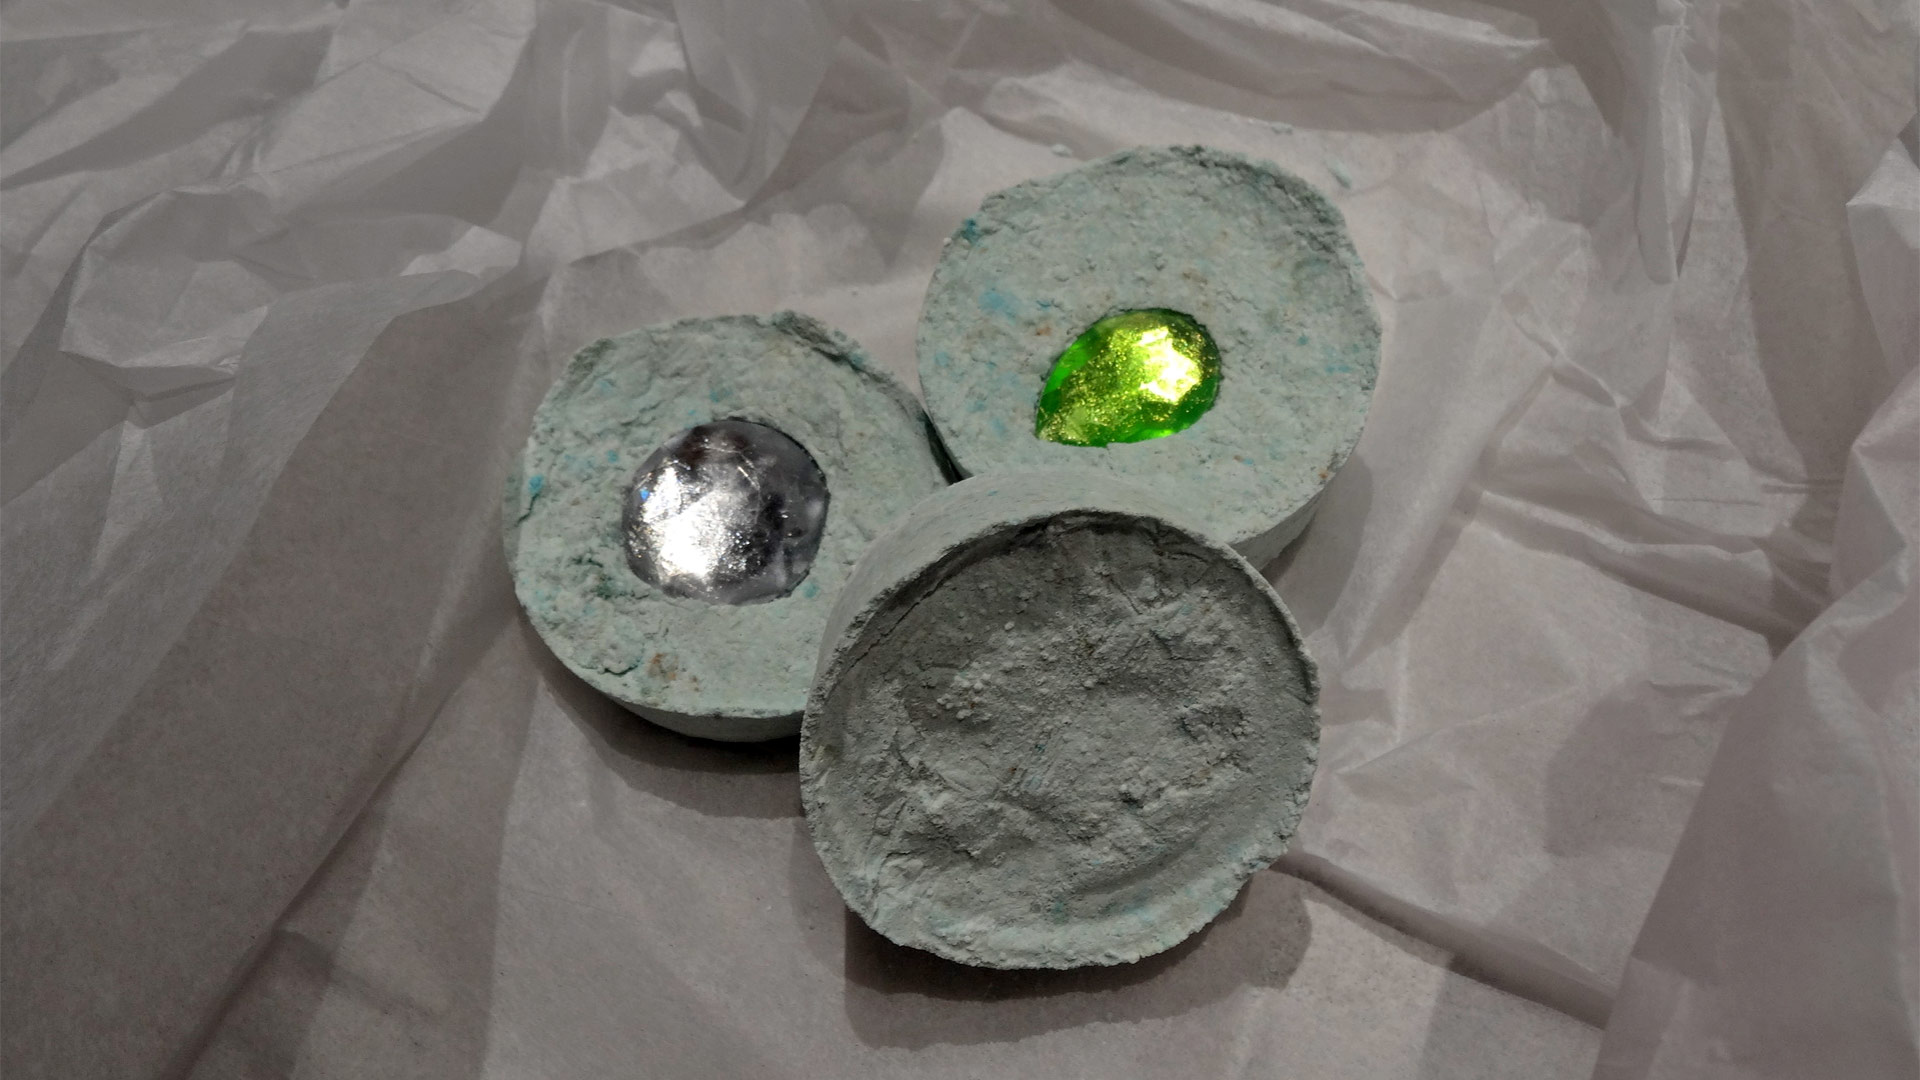 Three handmade soap discs in the shape of hockey pucks, with a single embedded silver and emerald jewel